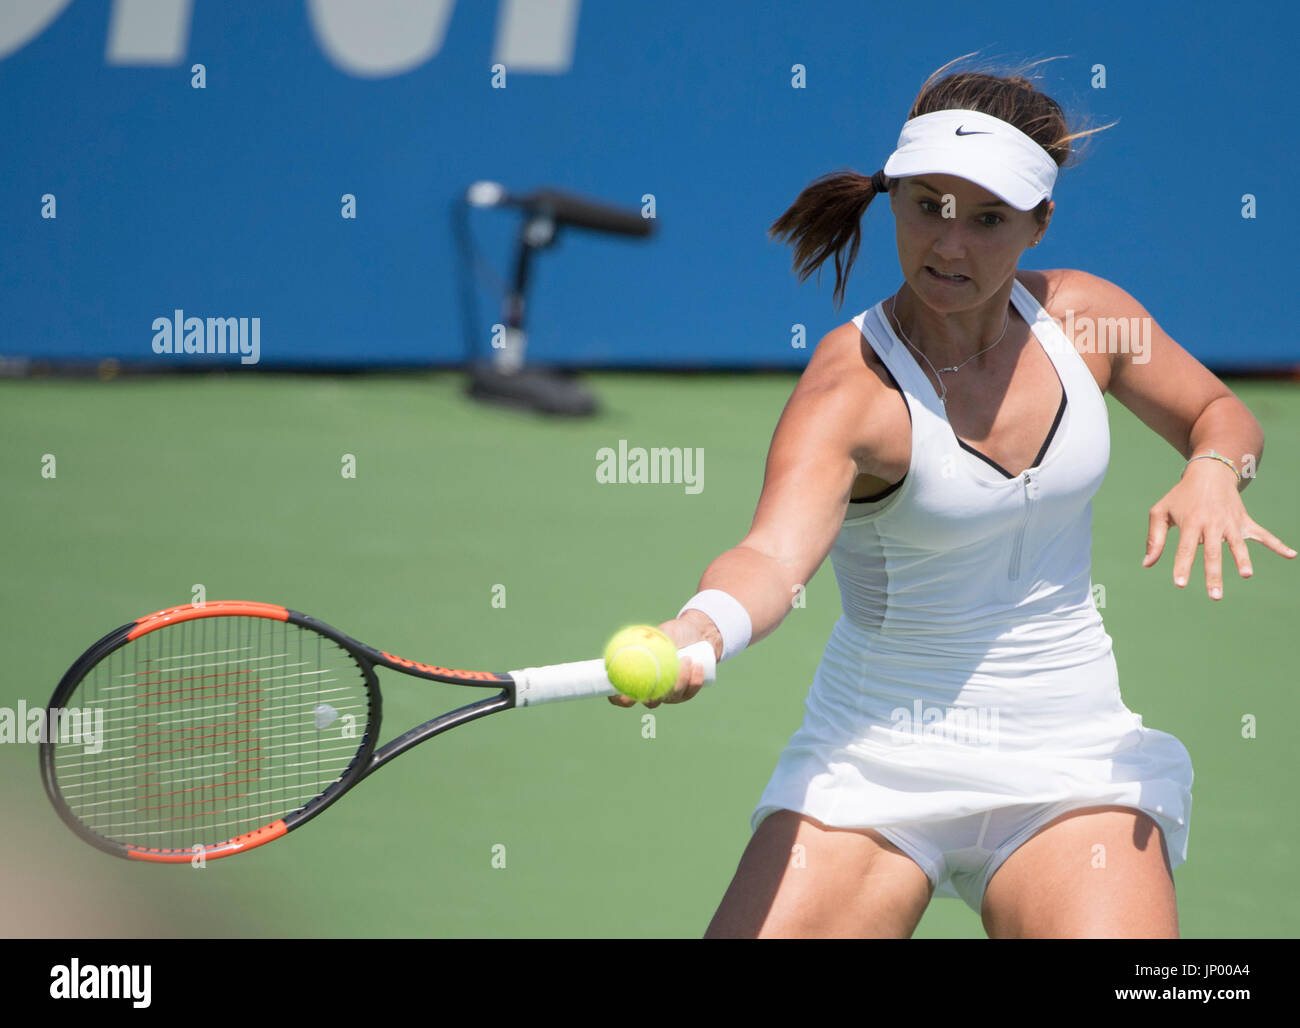 Washington, DC, USA. 31st July, 2017. Lauren Davis (USA) struggles against  Aryna Sabalenka (BLR) losing the first set 7-5, at the Citi Open being  played at Rock Creek Park Tennis Center in